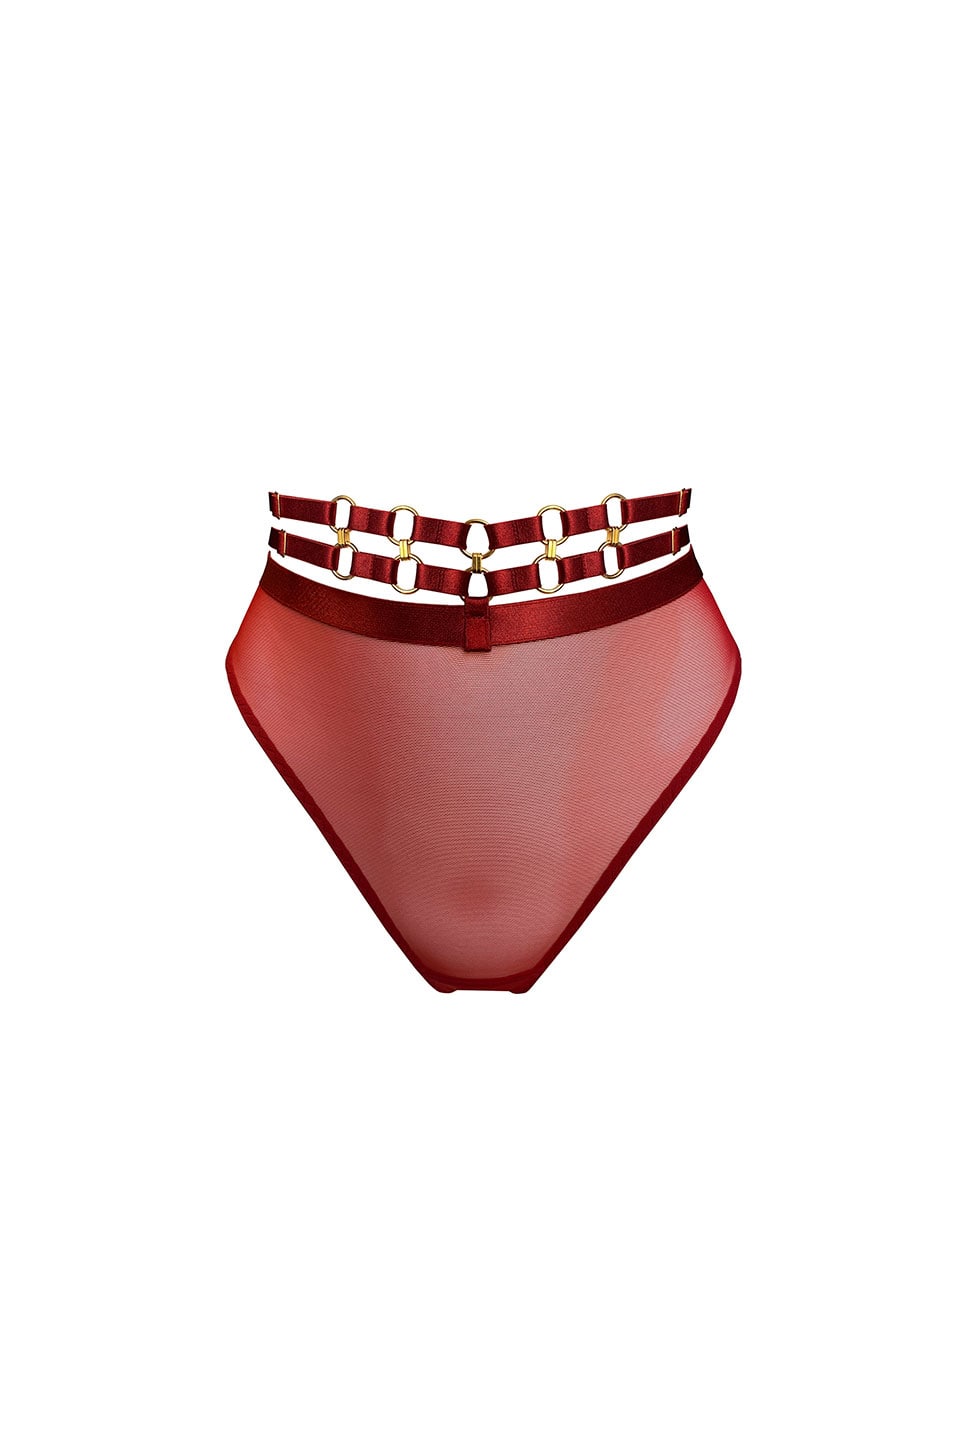 Shop online trendy Burnt Red Undergarments from Bordelle Fashion designer. Product gallery 1